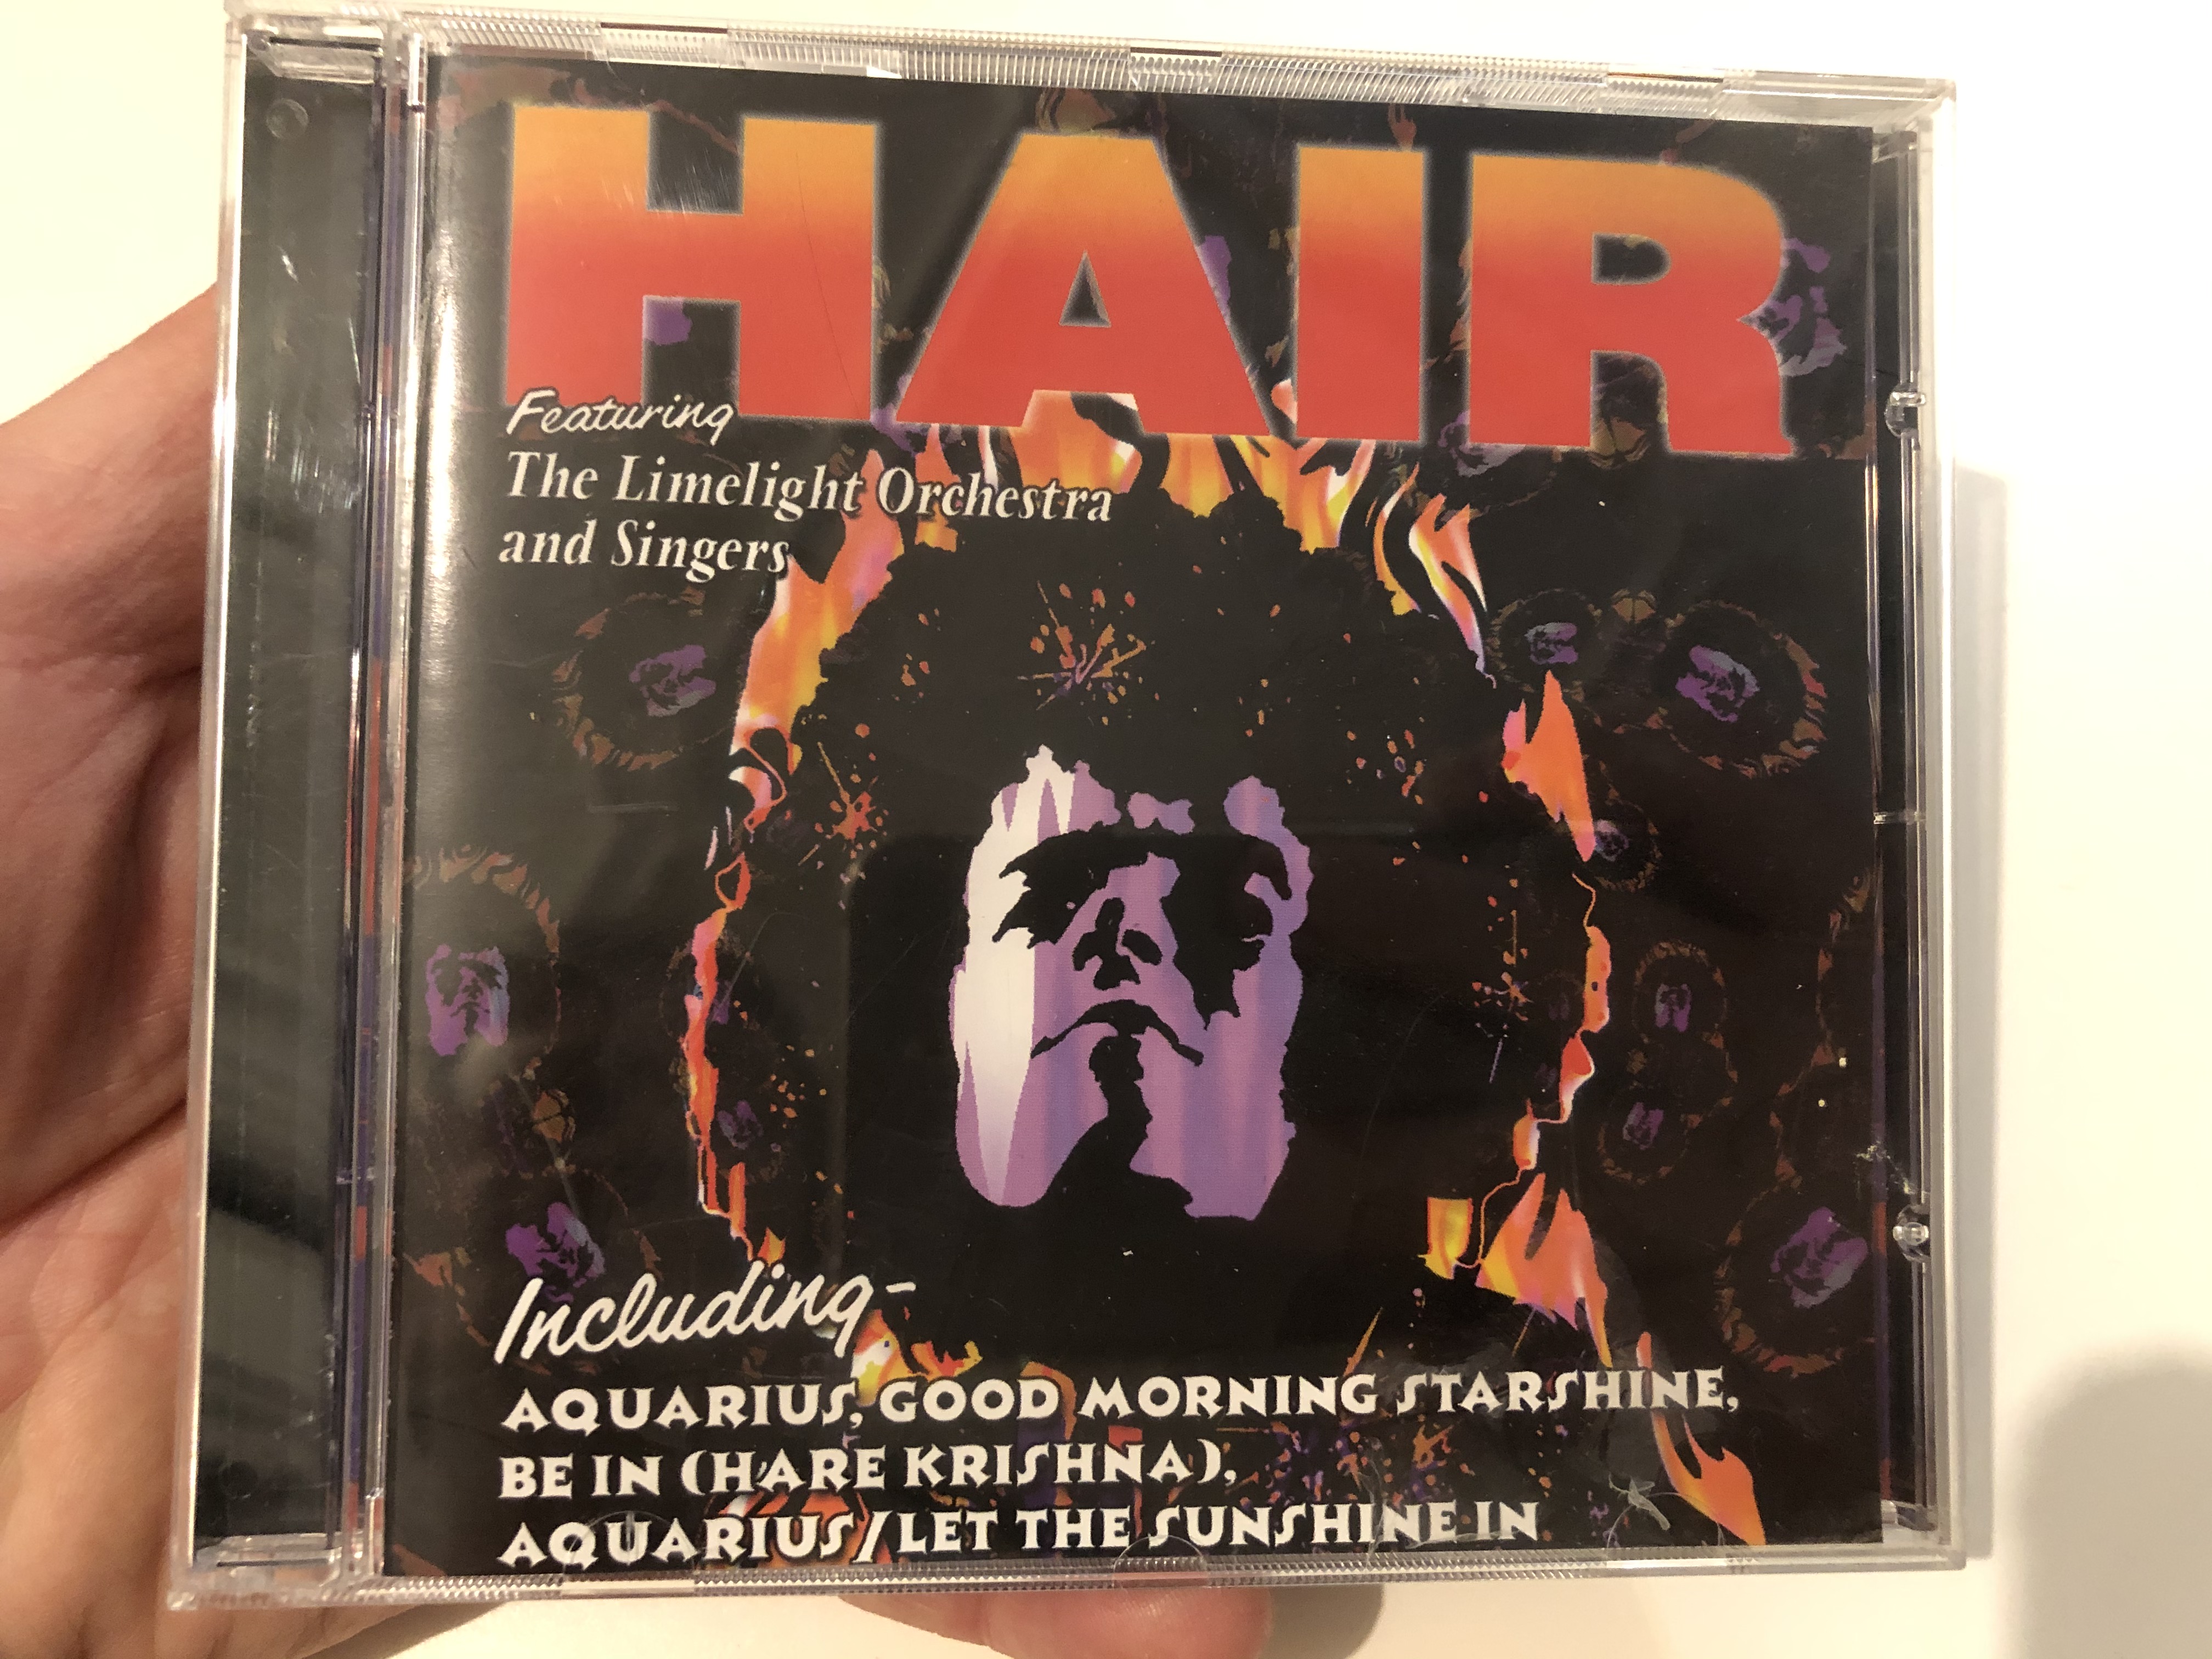 hair-featuring-the-limelight-orchestra-and-singers-including-aquarius-good-morning-starshine-be-in-hare-krishna-aquariuslet-the-sunshine-in-s.p.-series-audio-cd-1999-sp004-2-1-.jpg